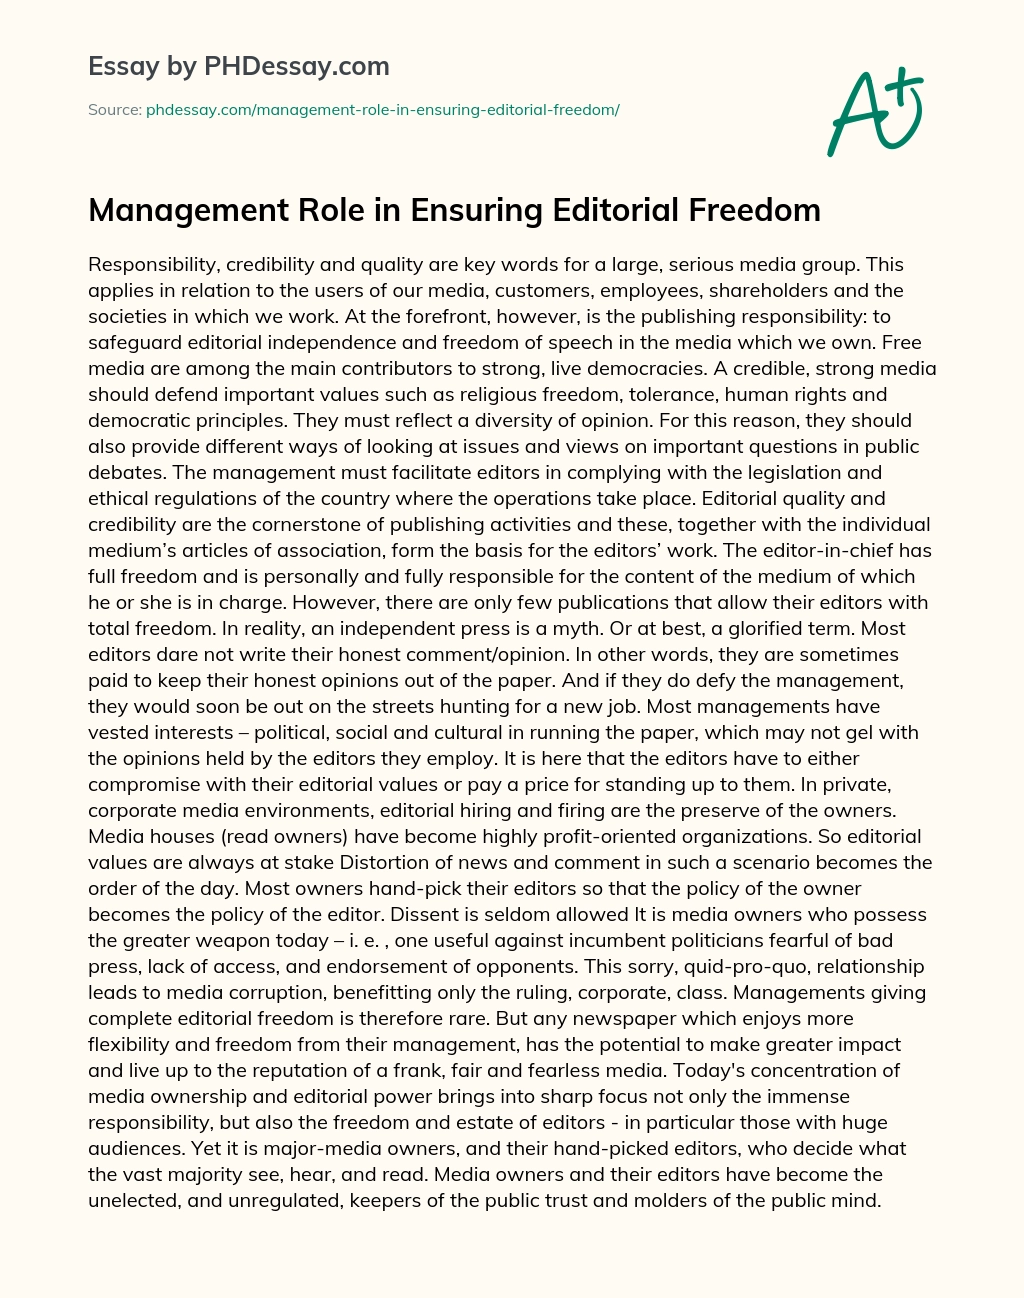 Management Role in Ensuring Editorial Freedom essay